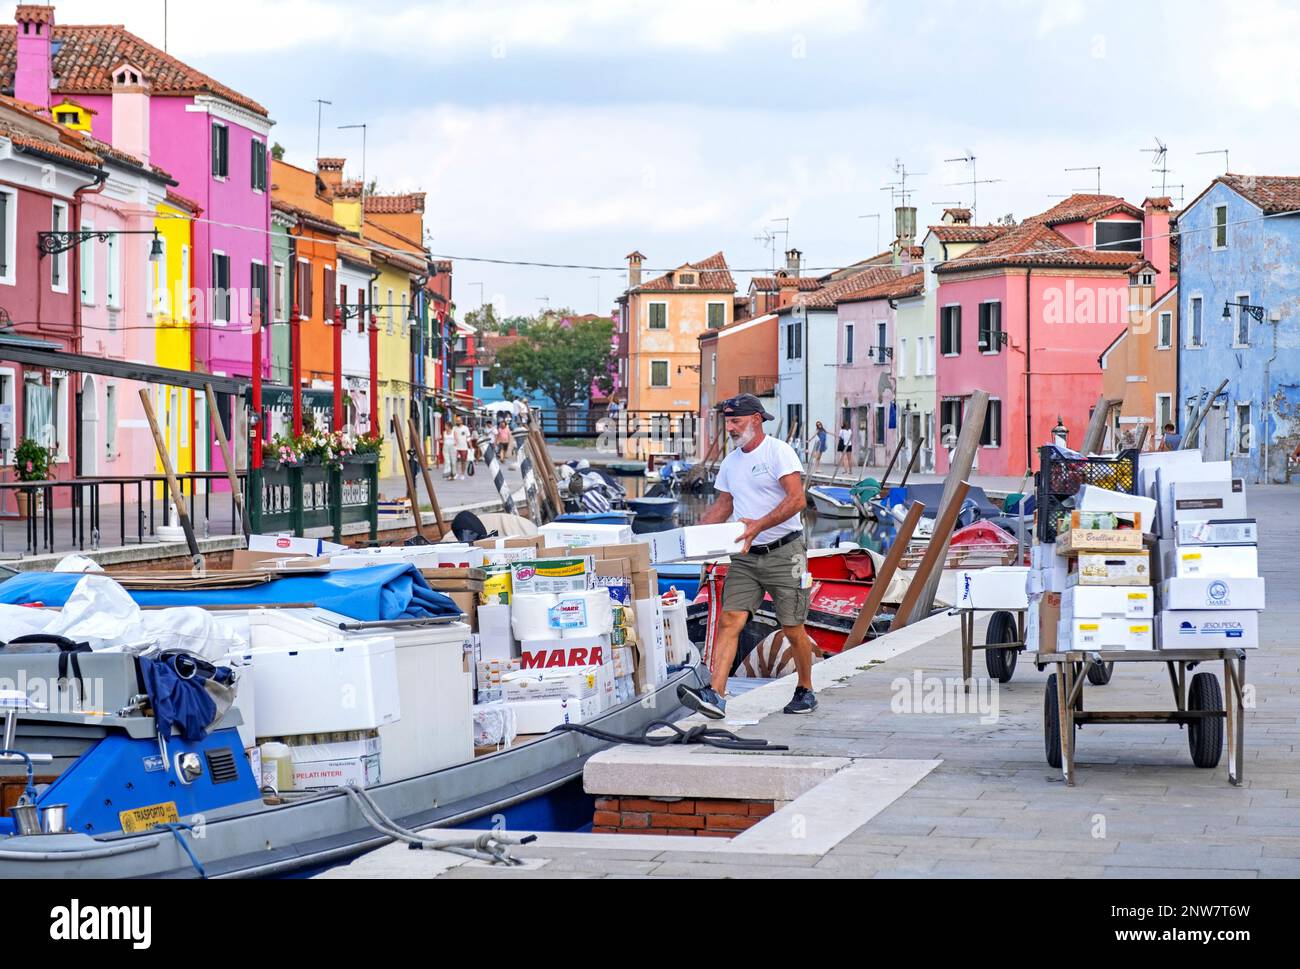 Transport of goods by canal boat and handcarts at car-free Burano, island in the Venetian Lagoon near Venice, Veneto, Northern Italy Stock Photo